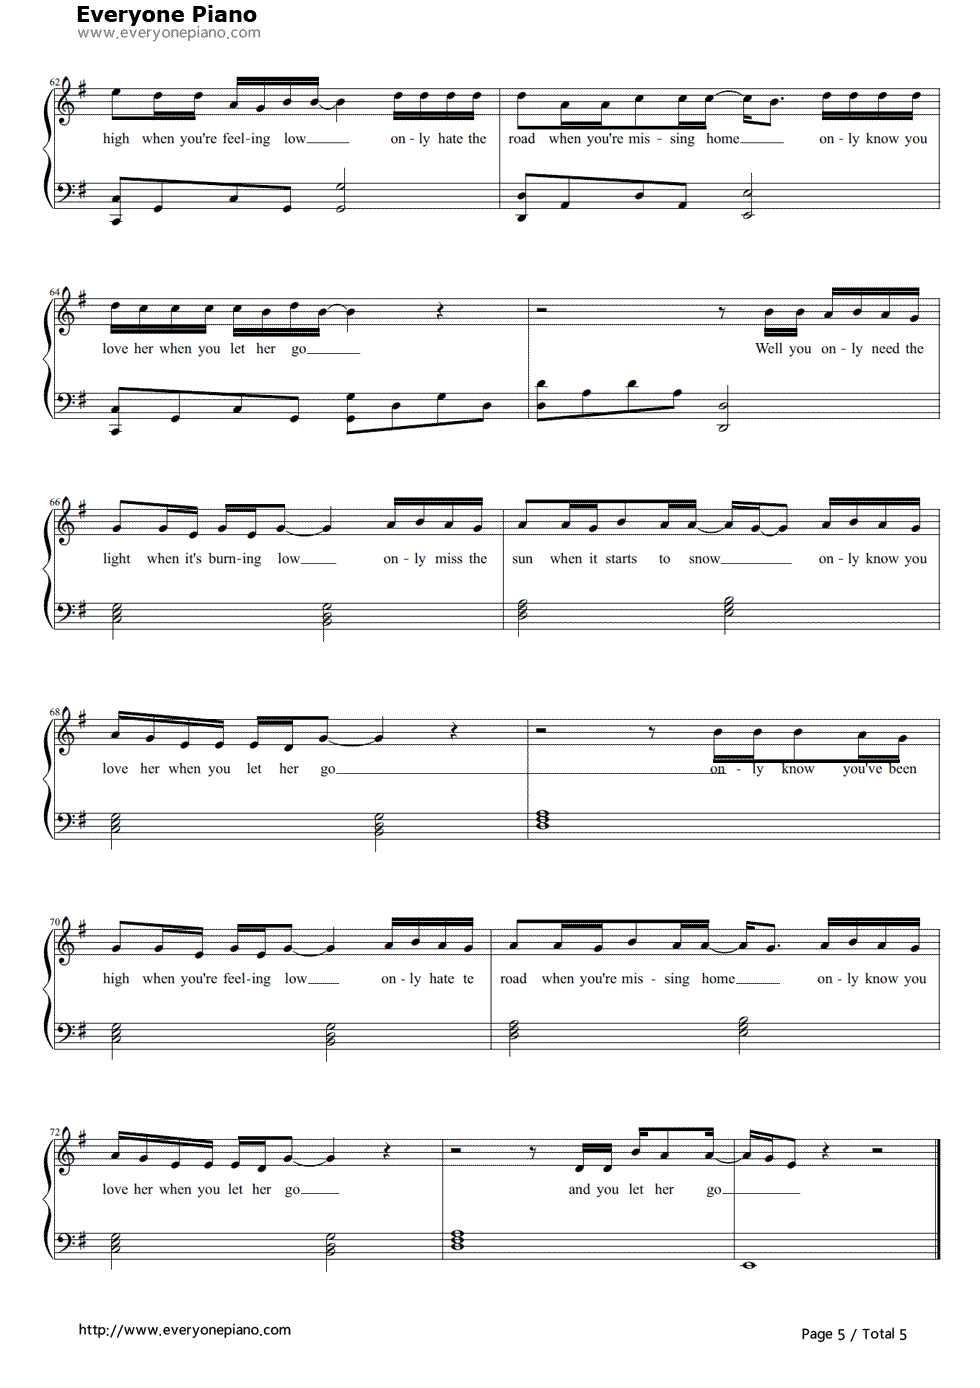 Let Her Go - Passenger Download The Pdf Here | Piano Sheet Music - Let Her Go Piano Sheet Music Free Printable